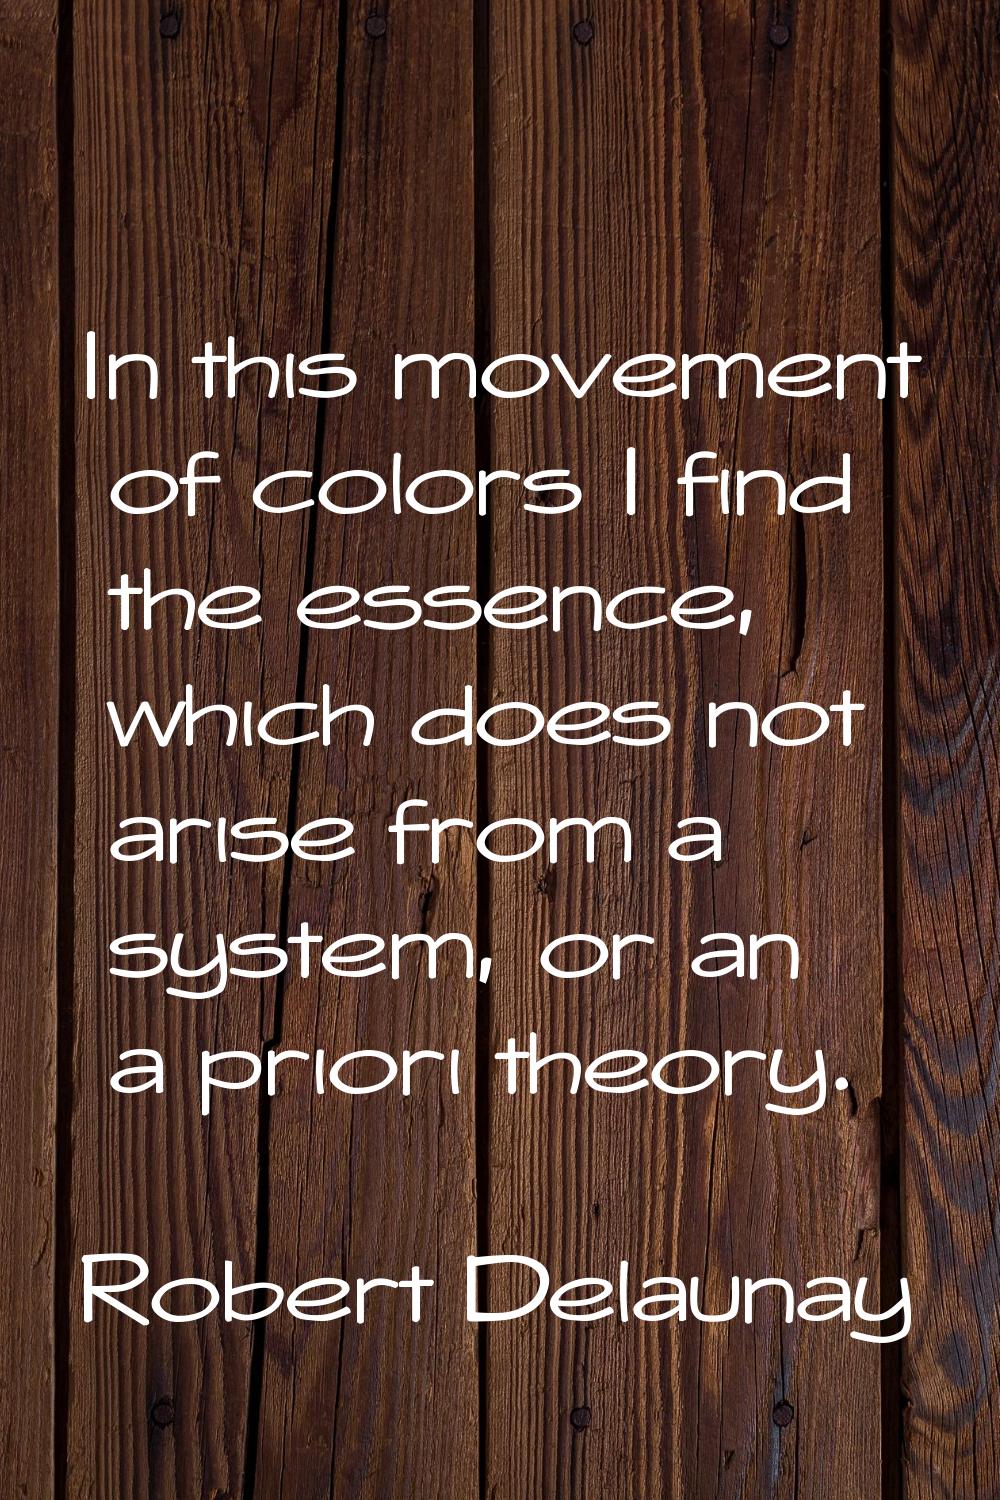 In this movement of colors I find the essence, which does not arise from a system, or an a priori t